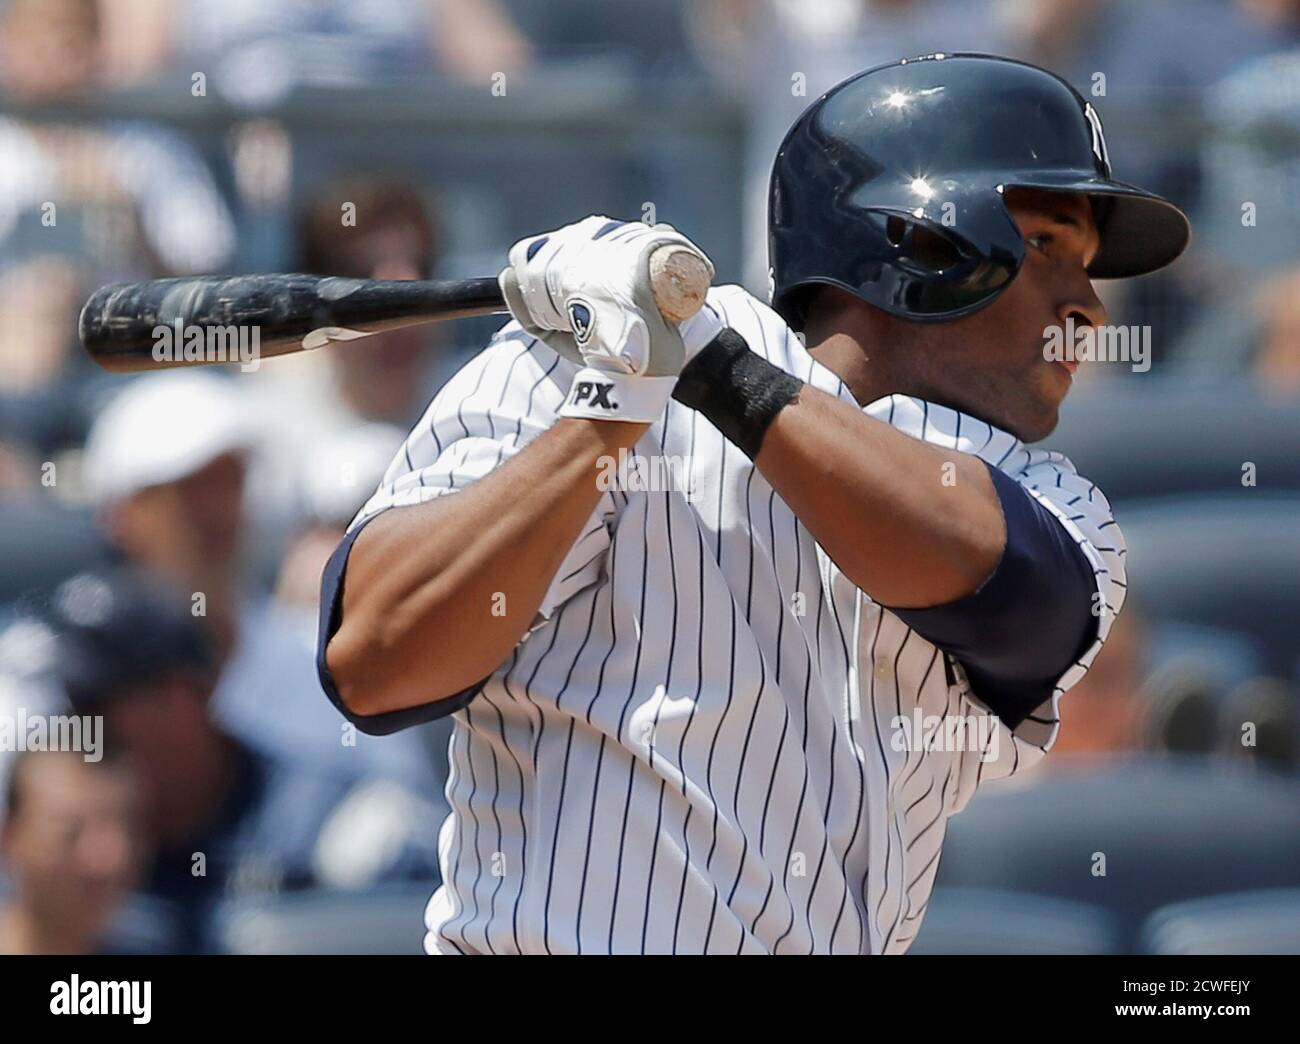 New York Yankees batter Zoilo Almonte hits a two-run single against the Tampa Bay Rays in the third inning of their MLB American League game at Yankee Stadium in New York, June 22, 2013. REUTERS/Ray Stubblebine (UNITED STATES - Tags: SPORT BASEBALL) Stock Photo